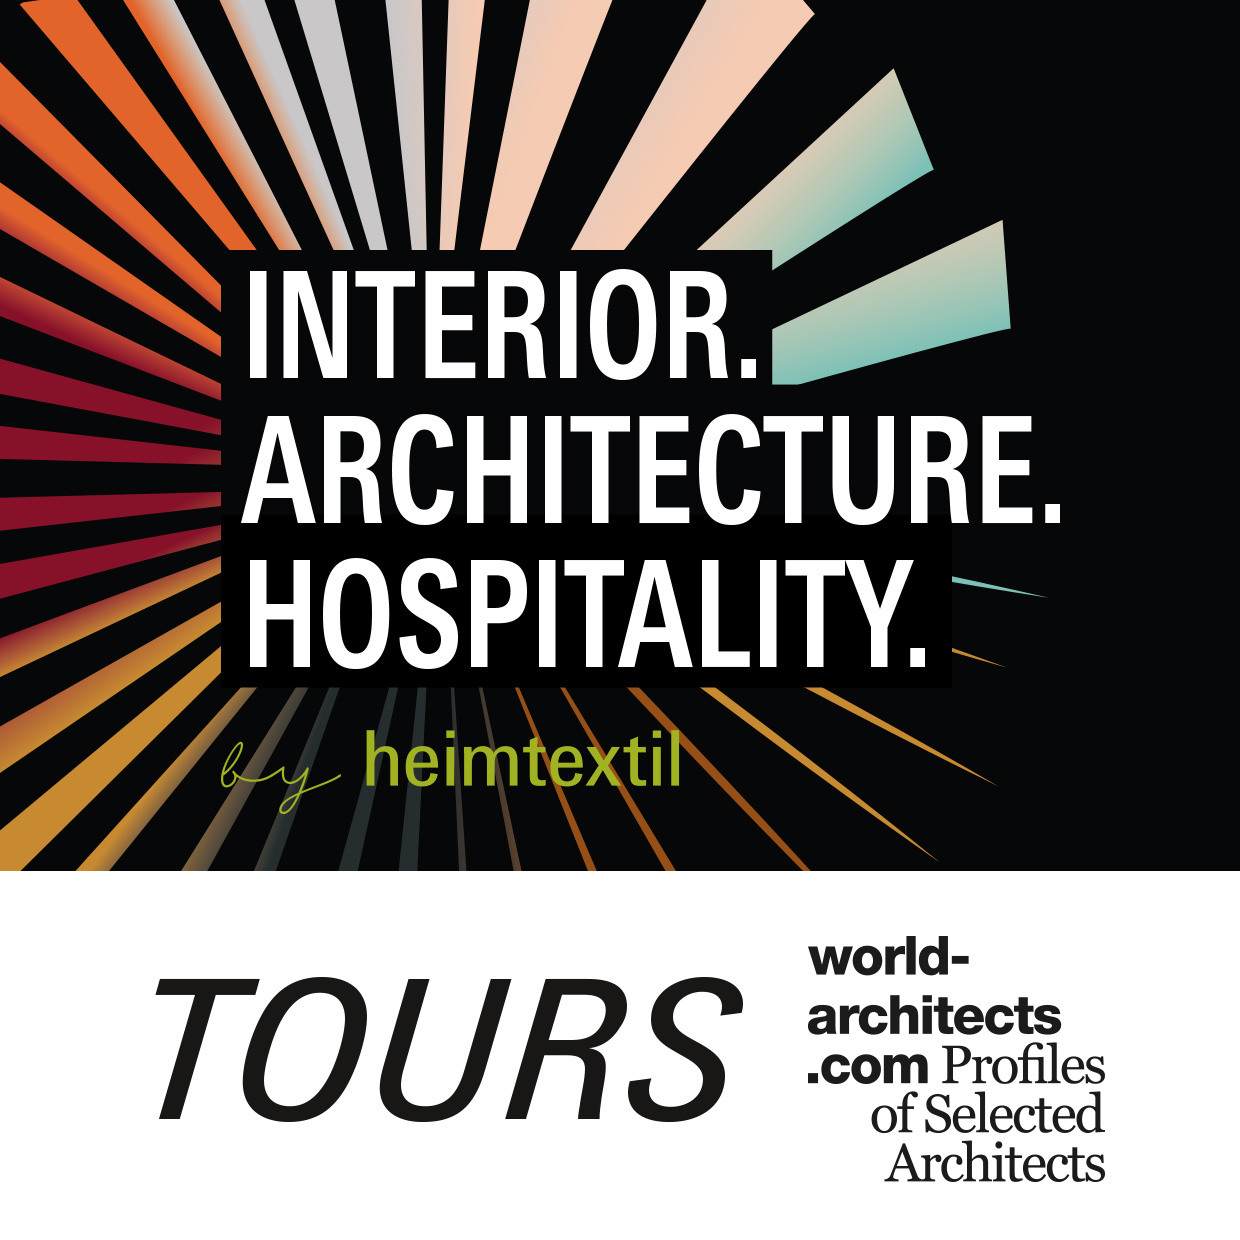 guided-tour-by-world-architects3